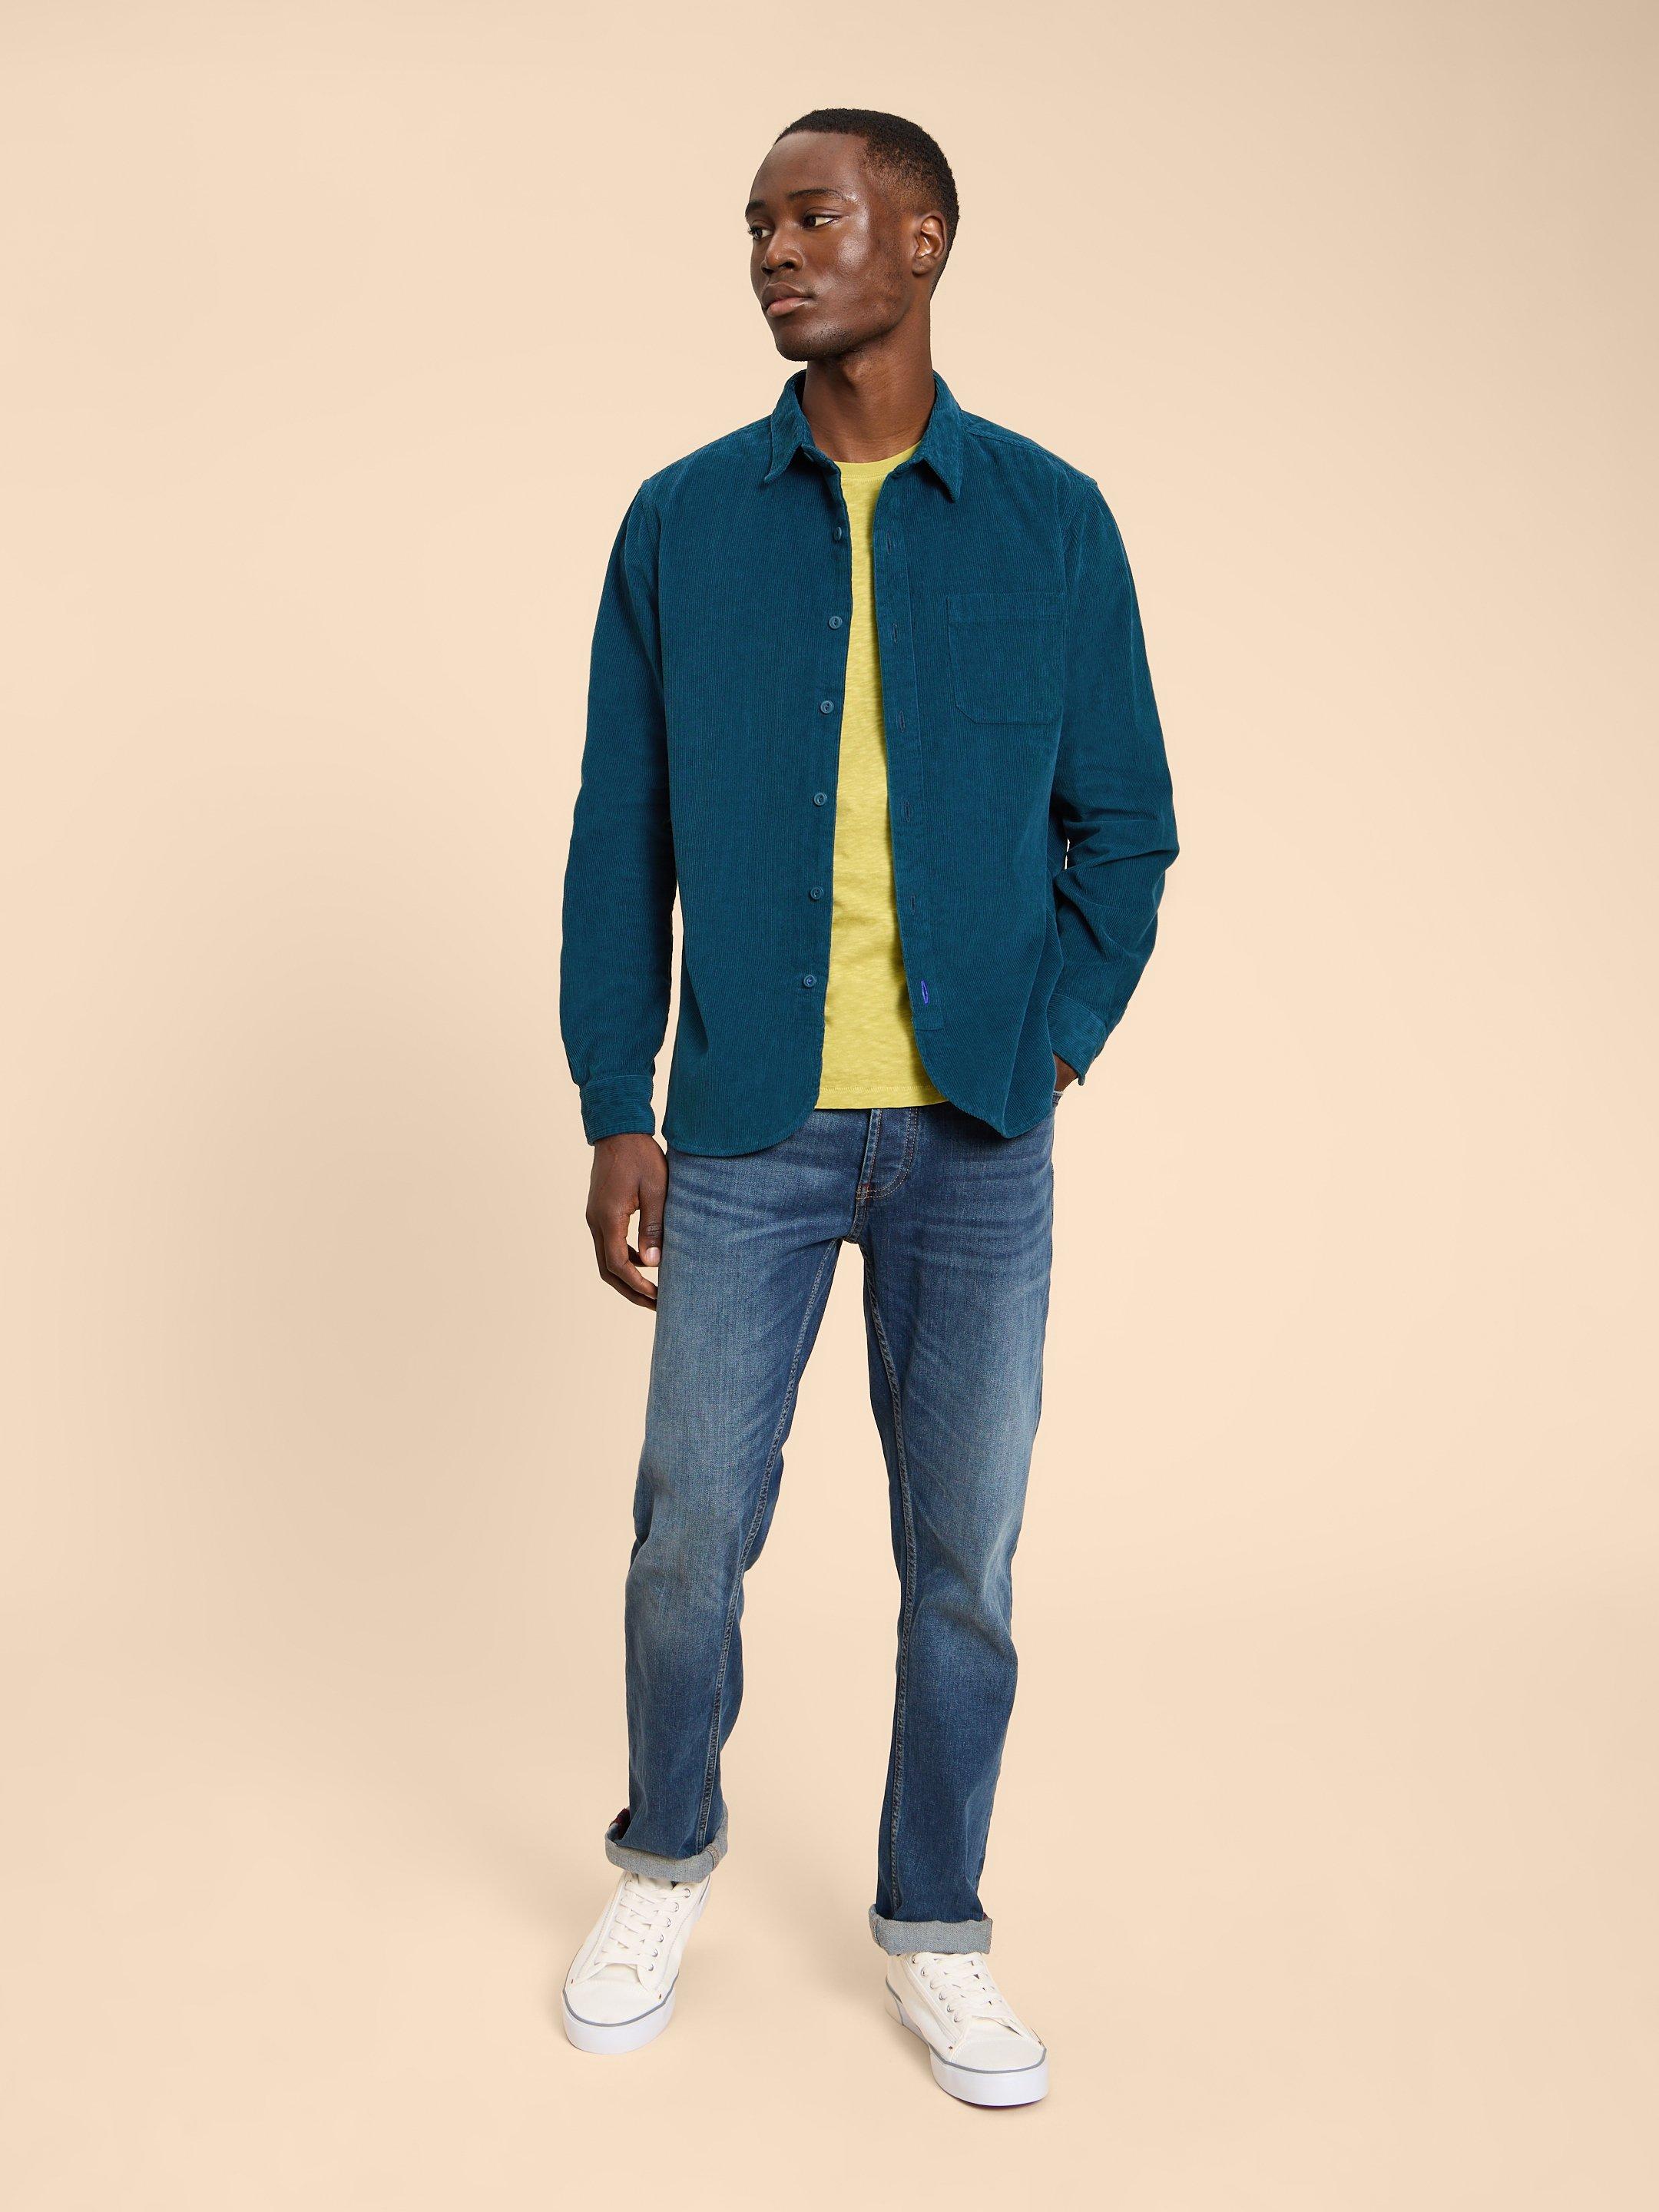 Whitwick Cord Shirt in MID TEAL - MODEL FRONT